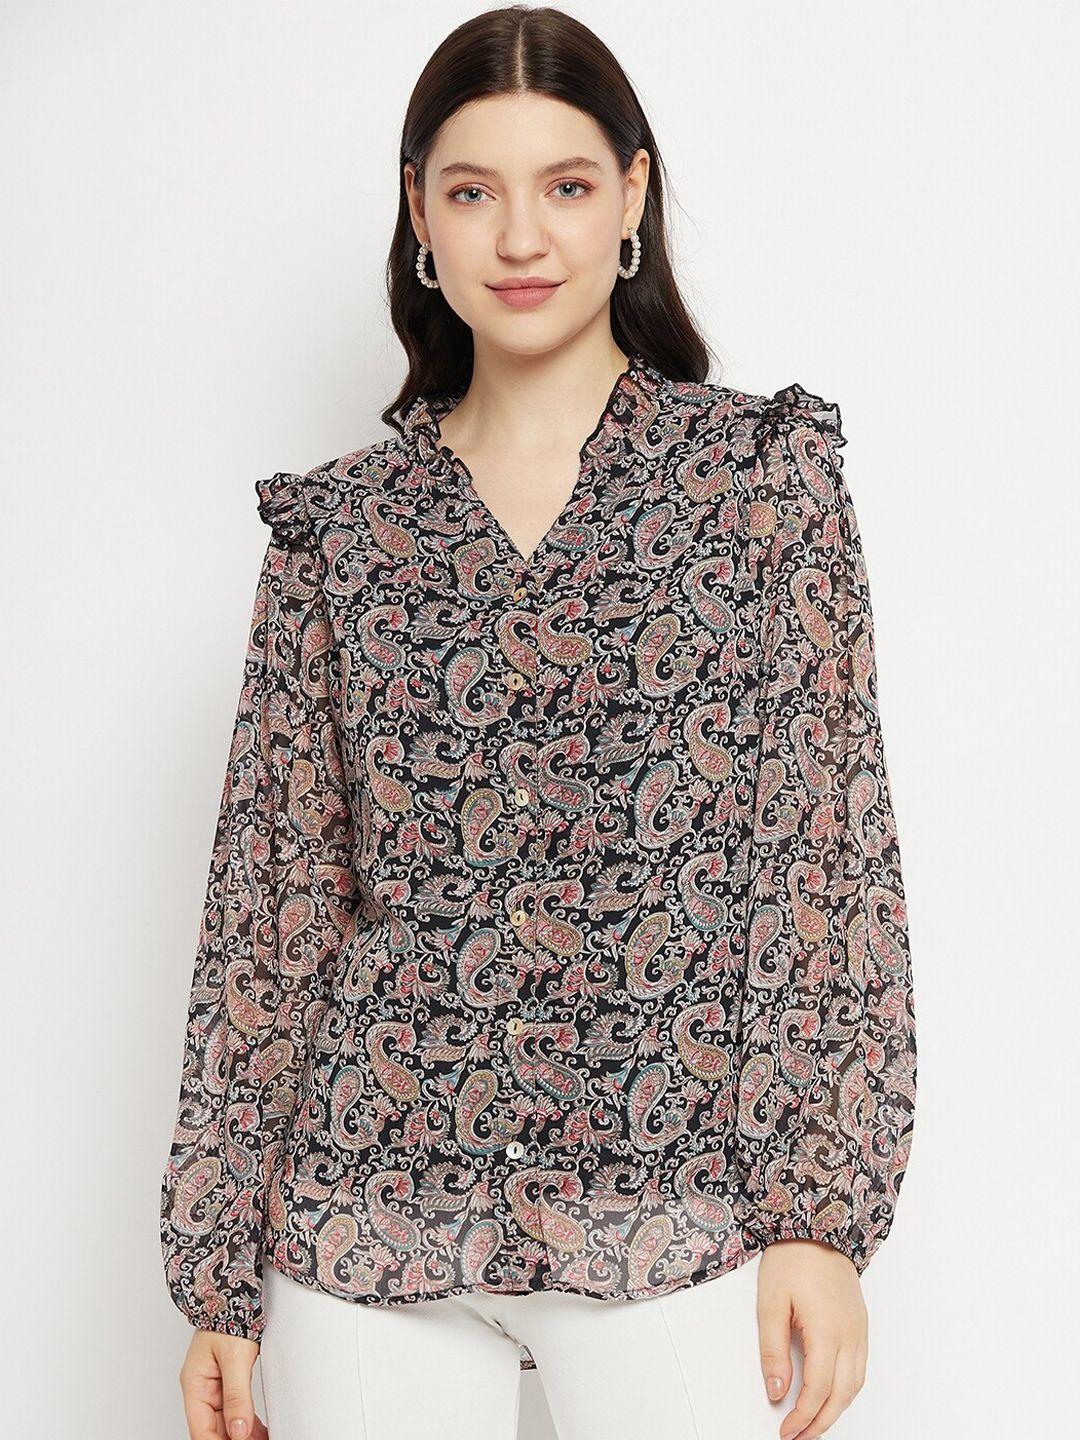 bitterlime paisley printed smart opaque georgette casual shirt